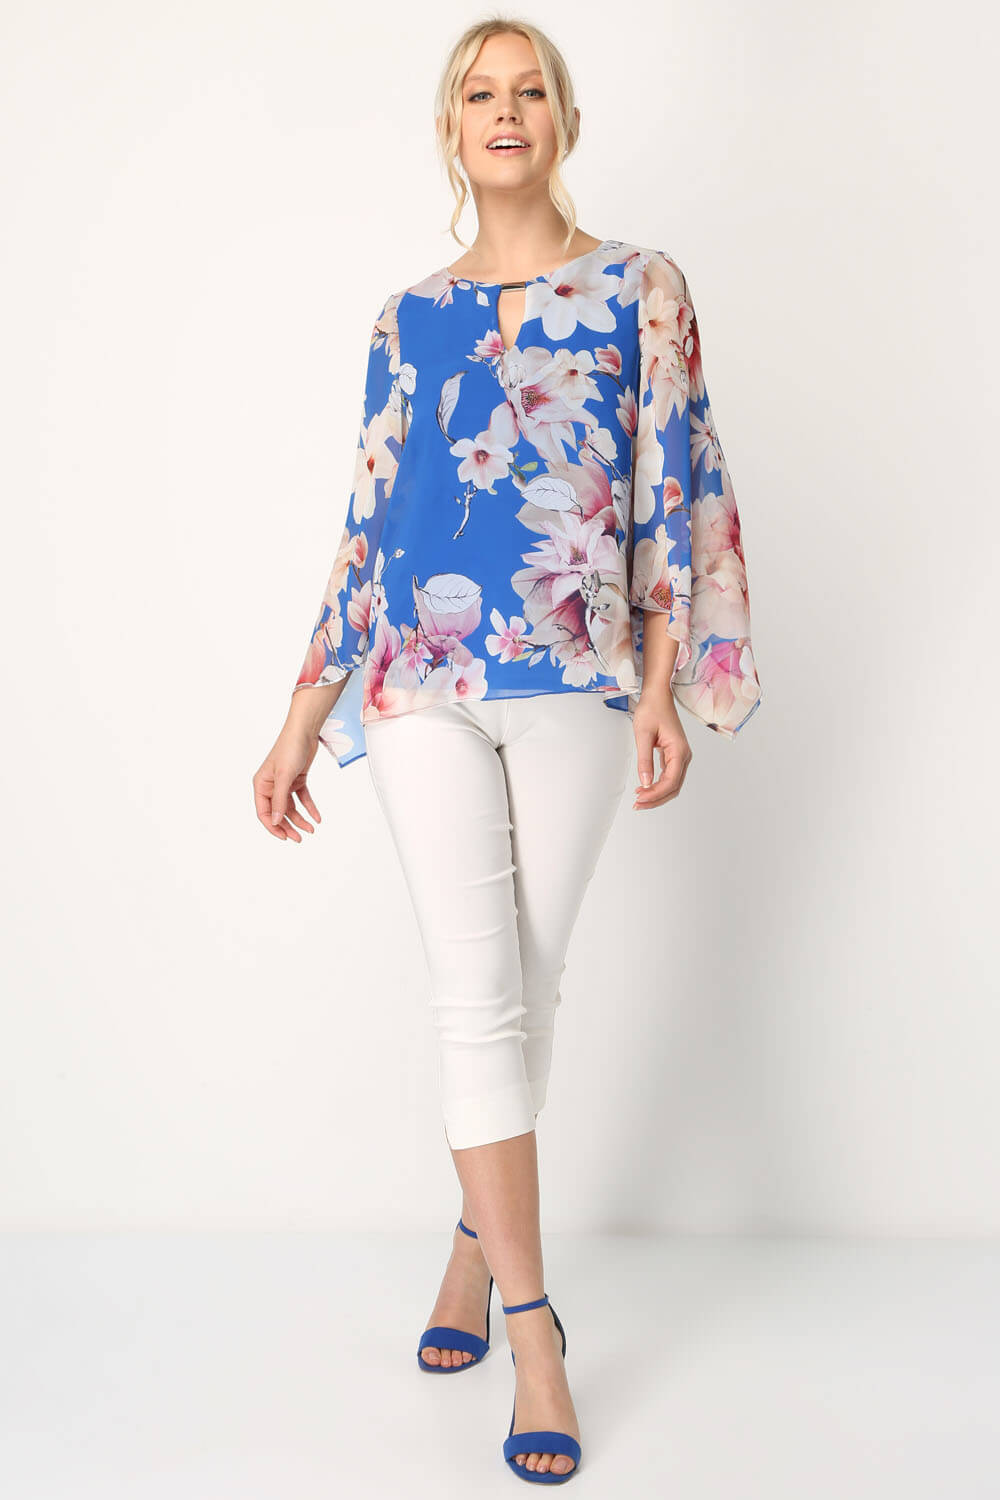 Royal Blue Floral Chiffon Overlay Top, Image 2 of 8